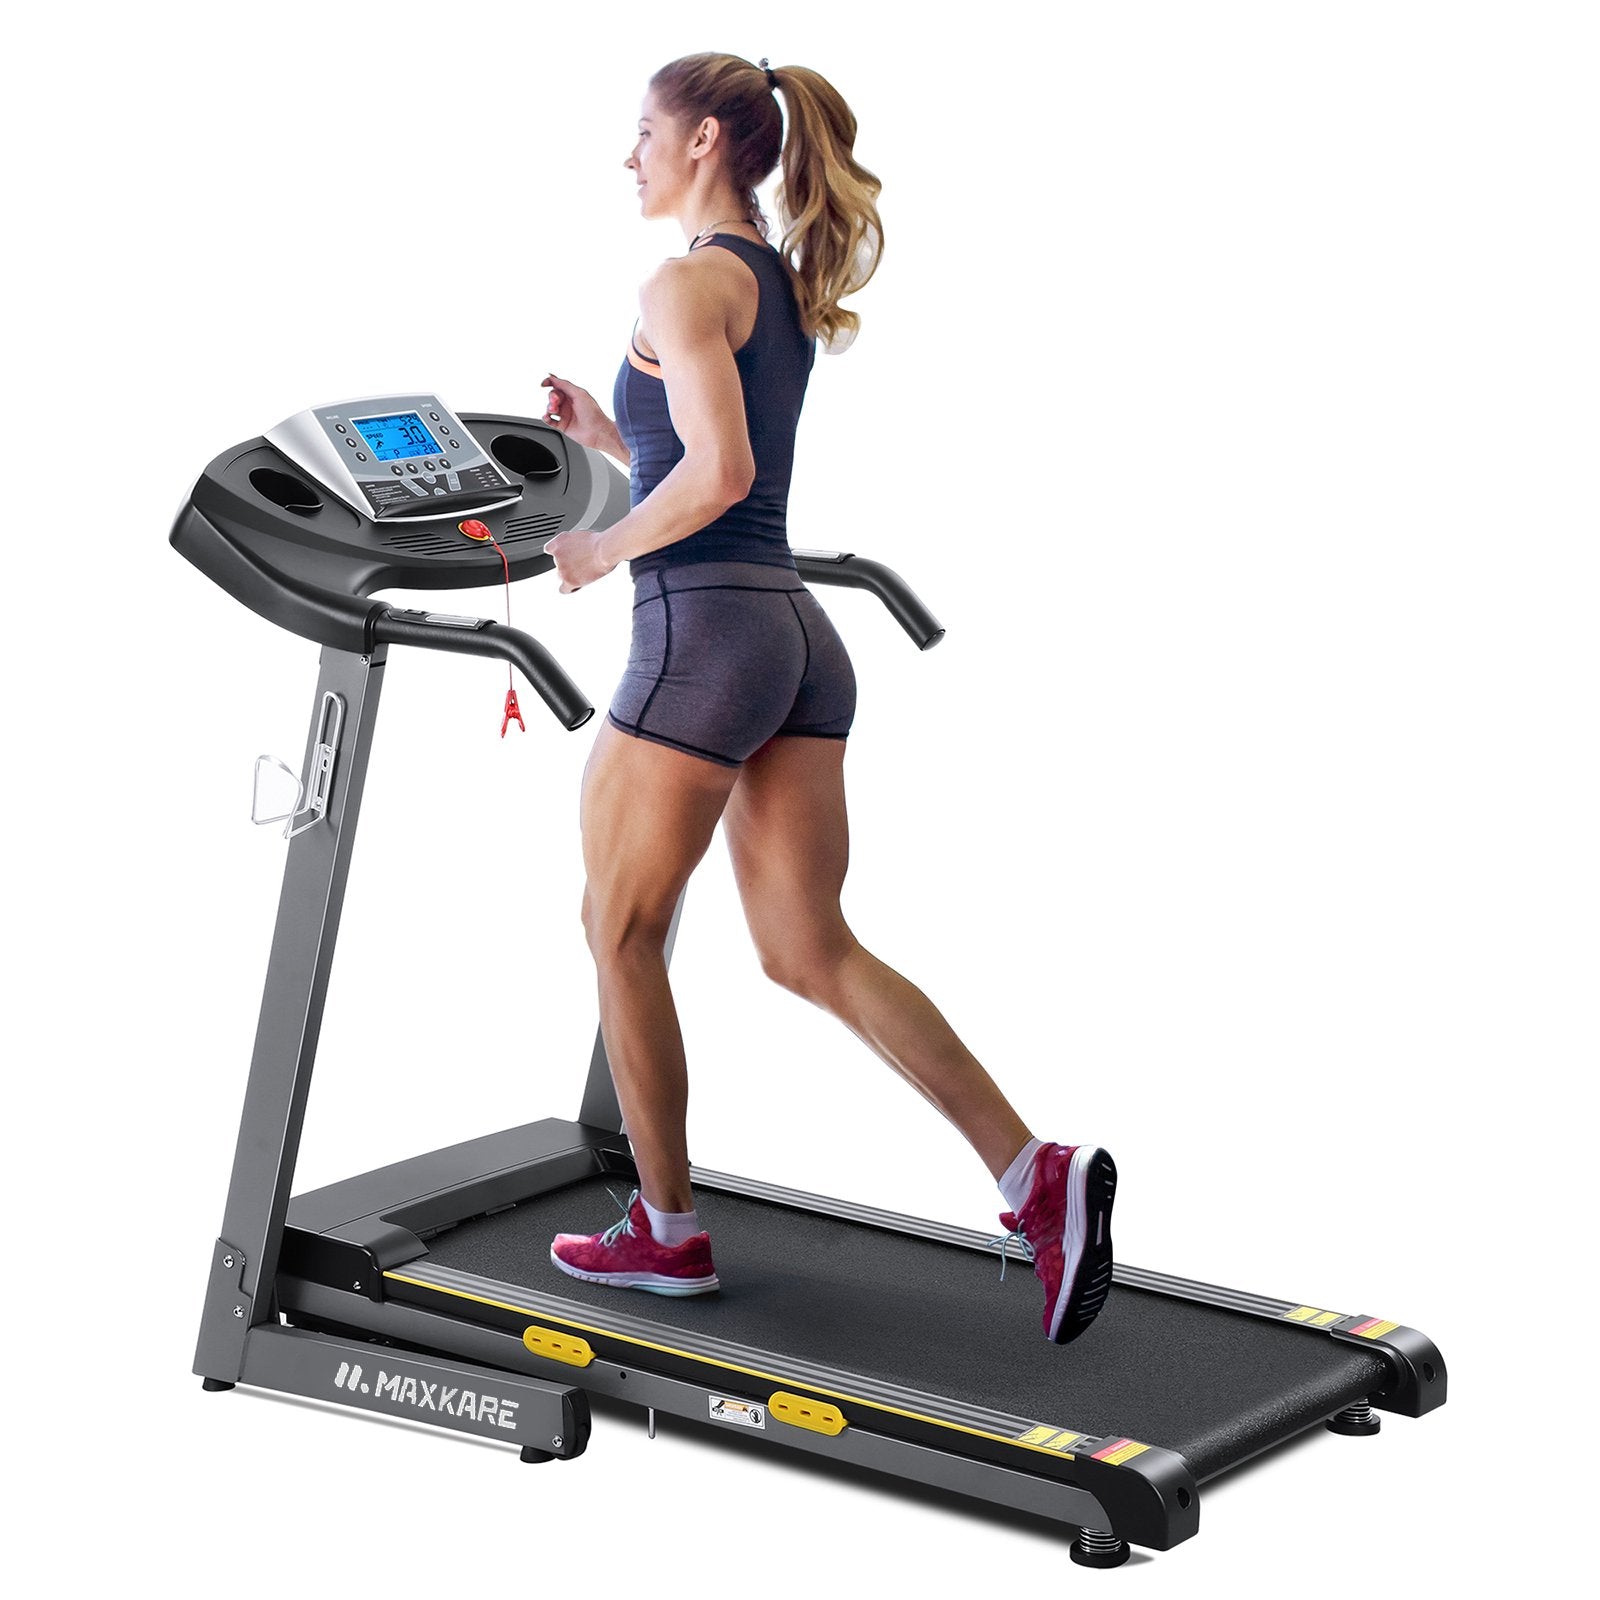 Load image into Gallery viewer, Treadmill Auto Incline Folding Treadmill for Home with 12-Level Adjustment,15 Preset Training Programs on Large LCD Display and 2.5HP Power 8.5MHP Max Speed for Office Workout
